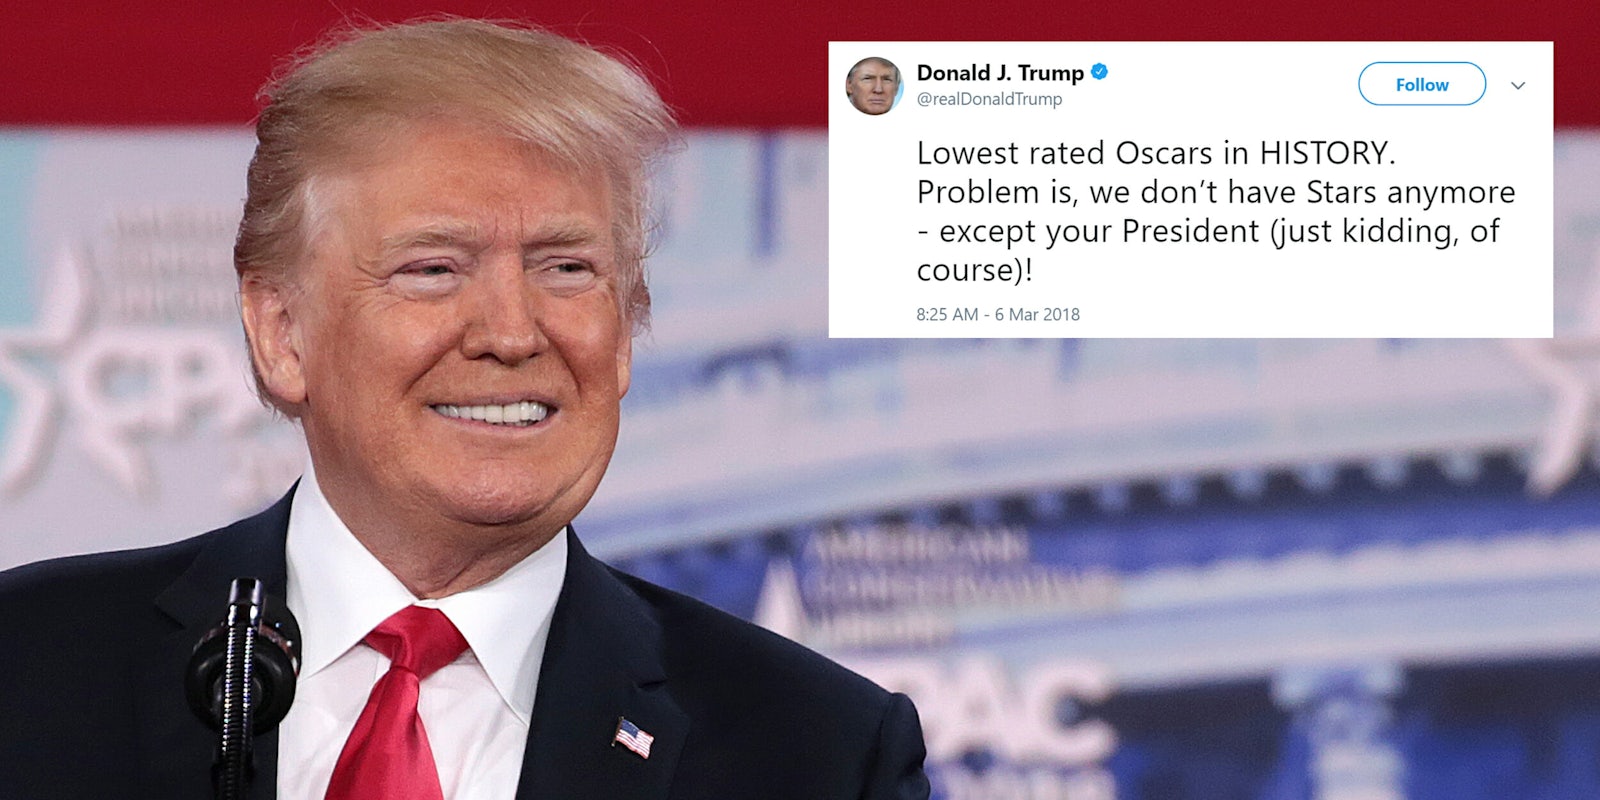 Donald Trump with 'Lowest rated Oscars in HISTORY.' tweet